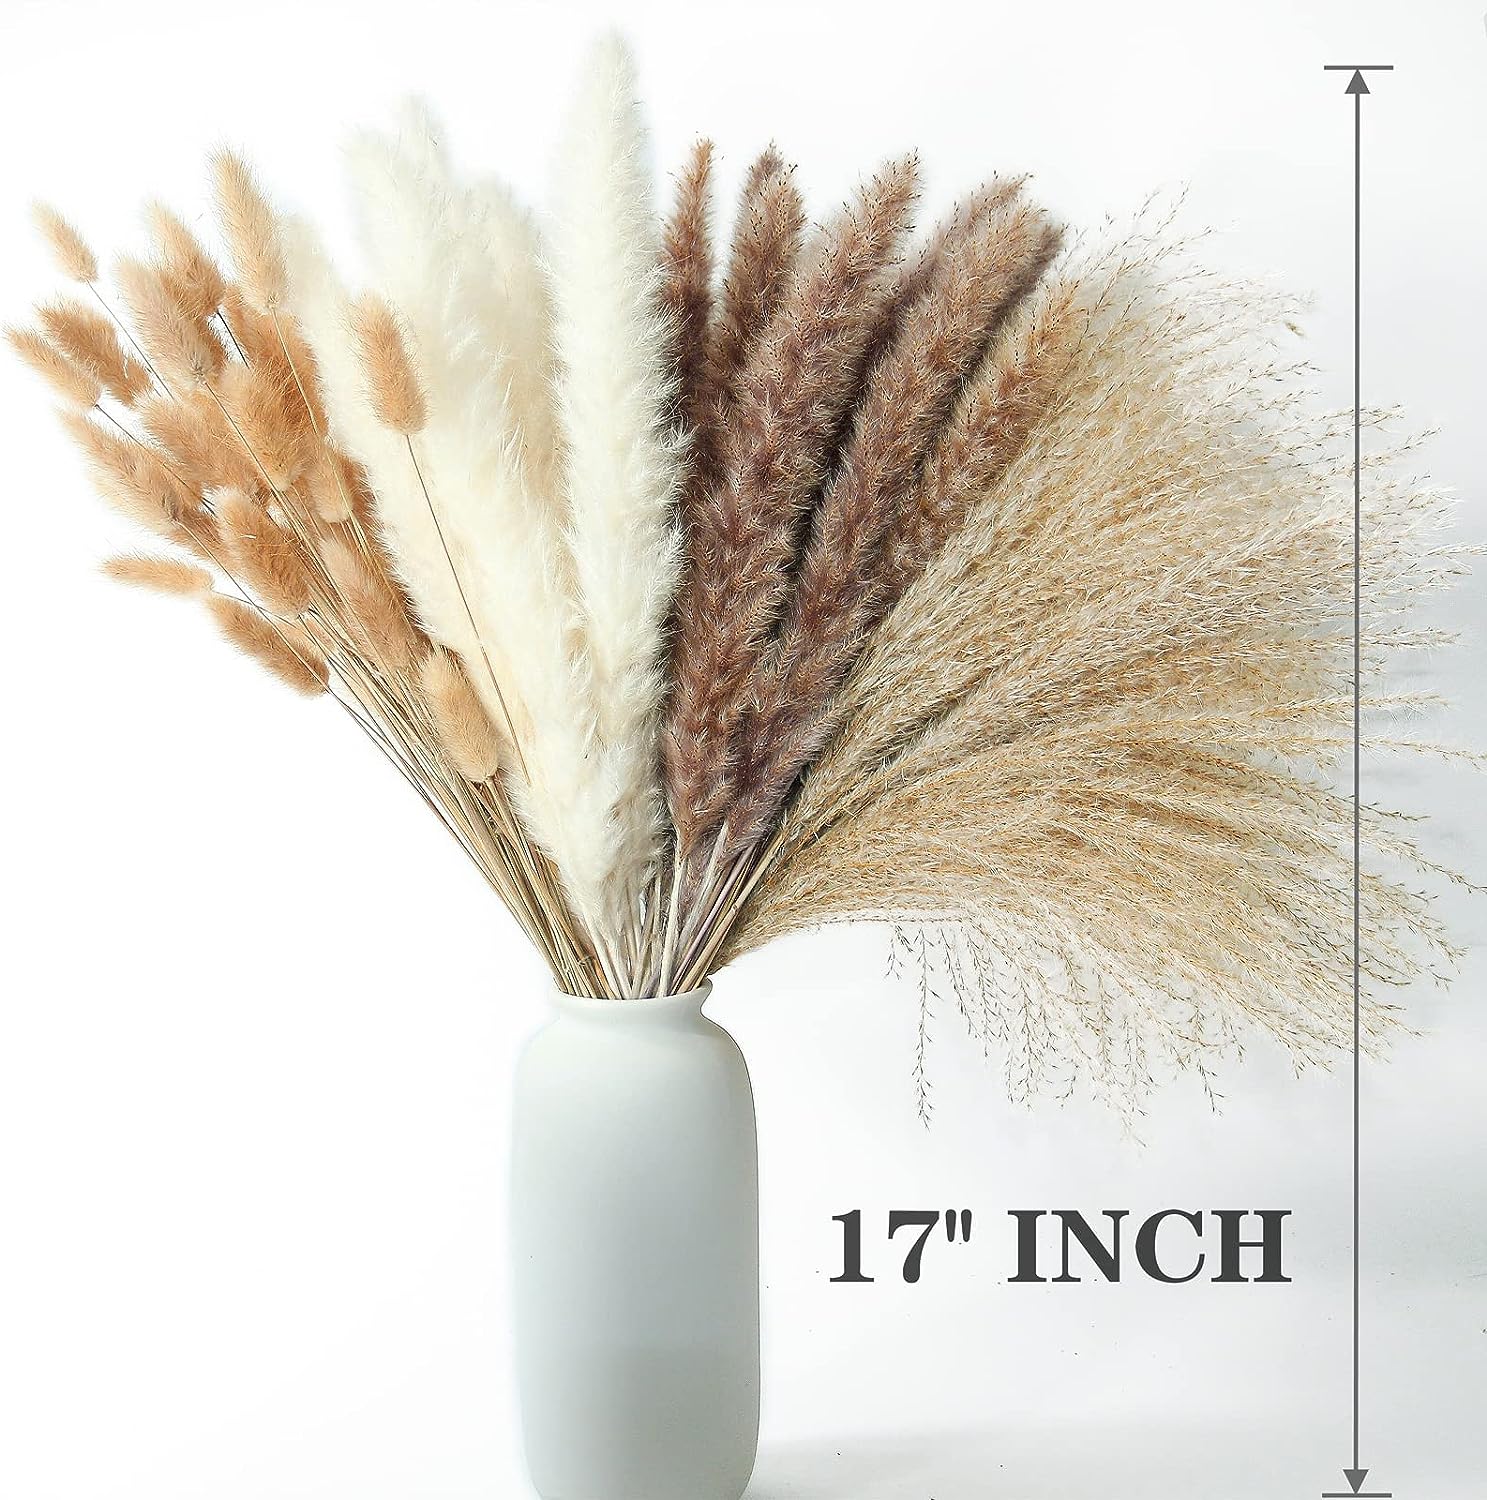 Dried Pampas Grass Decor, 100 PCS Pampas Grass Contains Bunny Tails Dried Flowers, Reed Grass Bouquet for Wedding Boho Flowers Home Table Decor, Rustic Farmhouse Party 3